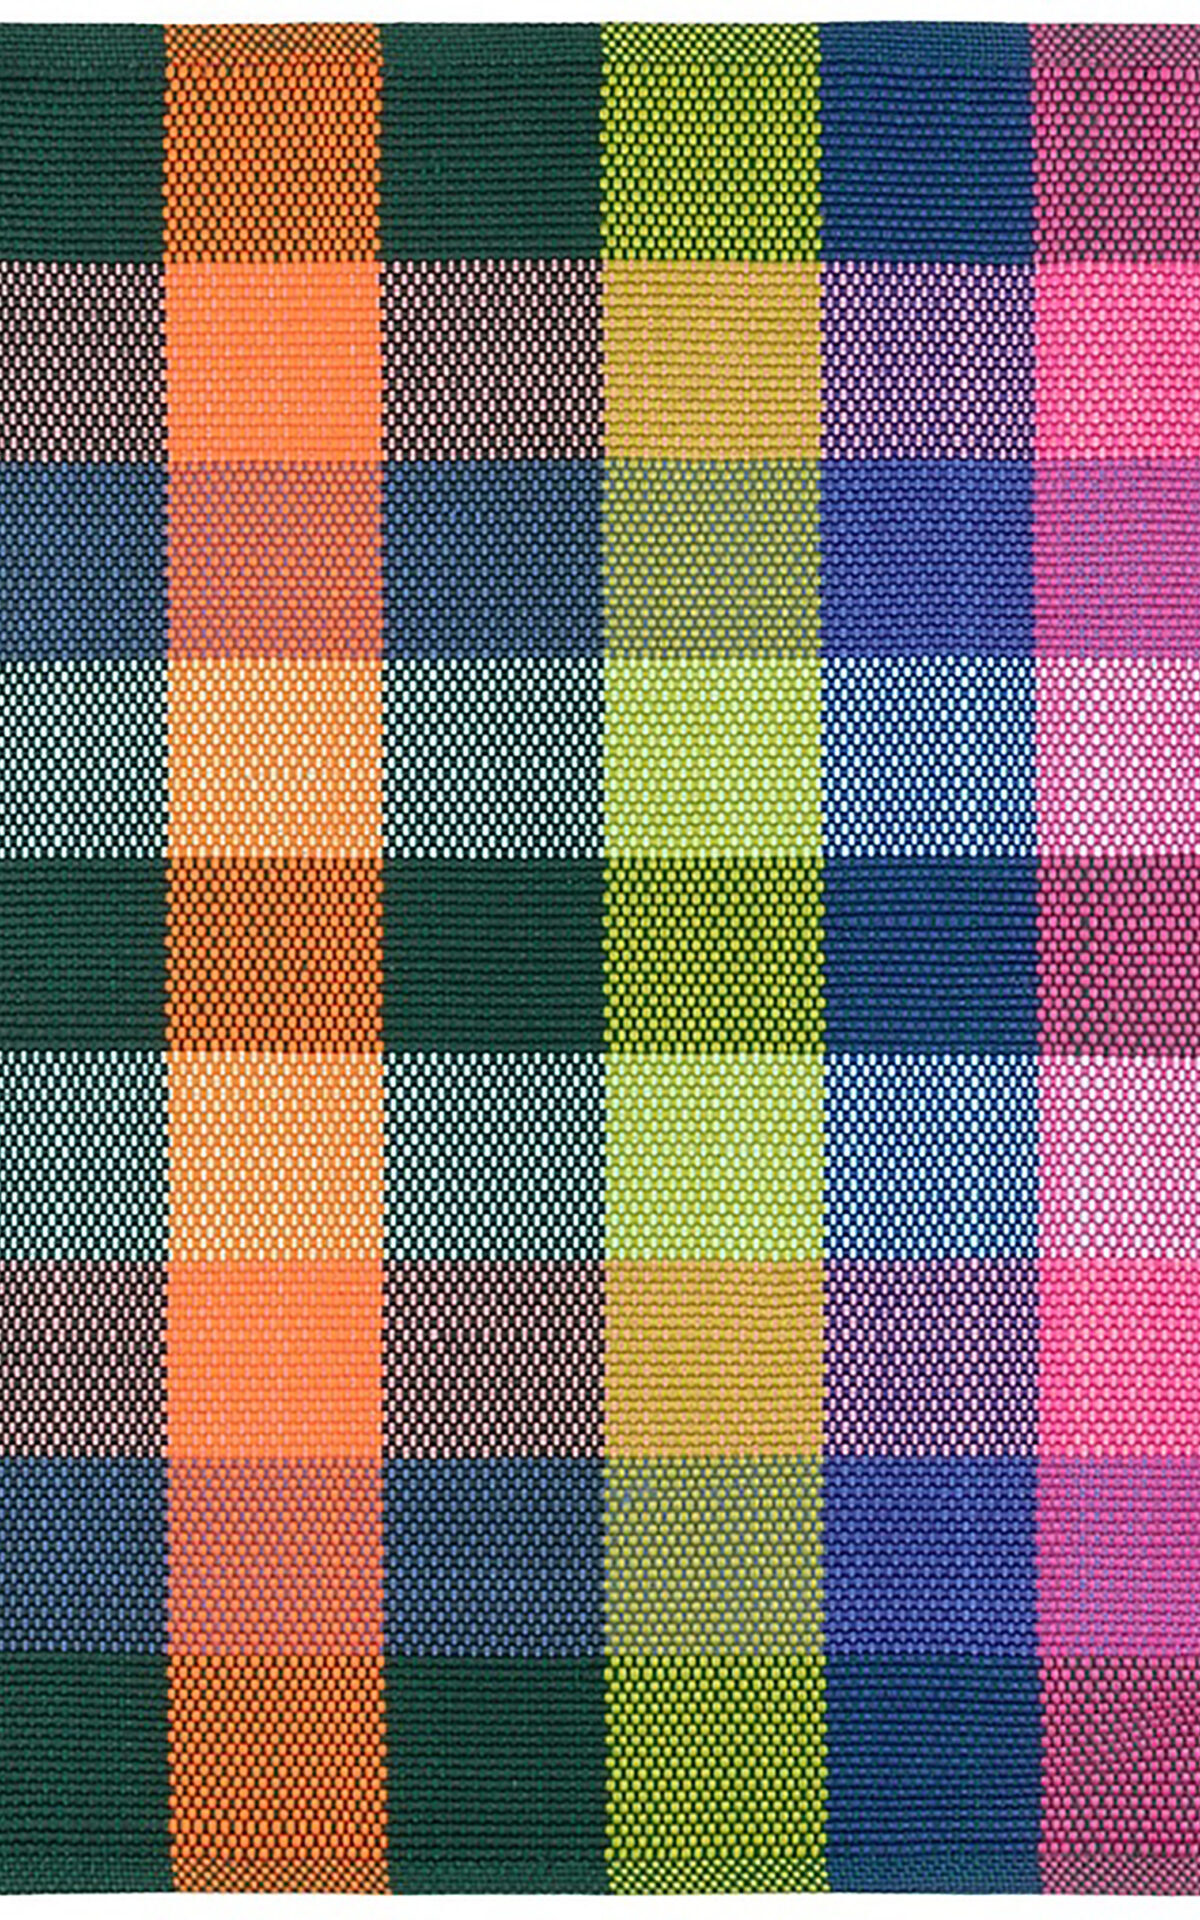 featured in the Russell nashville: a multicolored plaid rug with yellows, oranges, pinks, blues, and greens